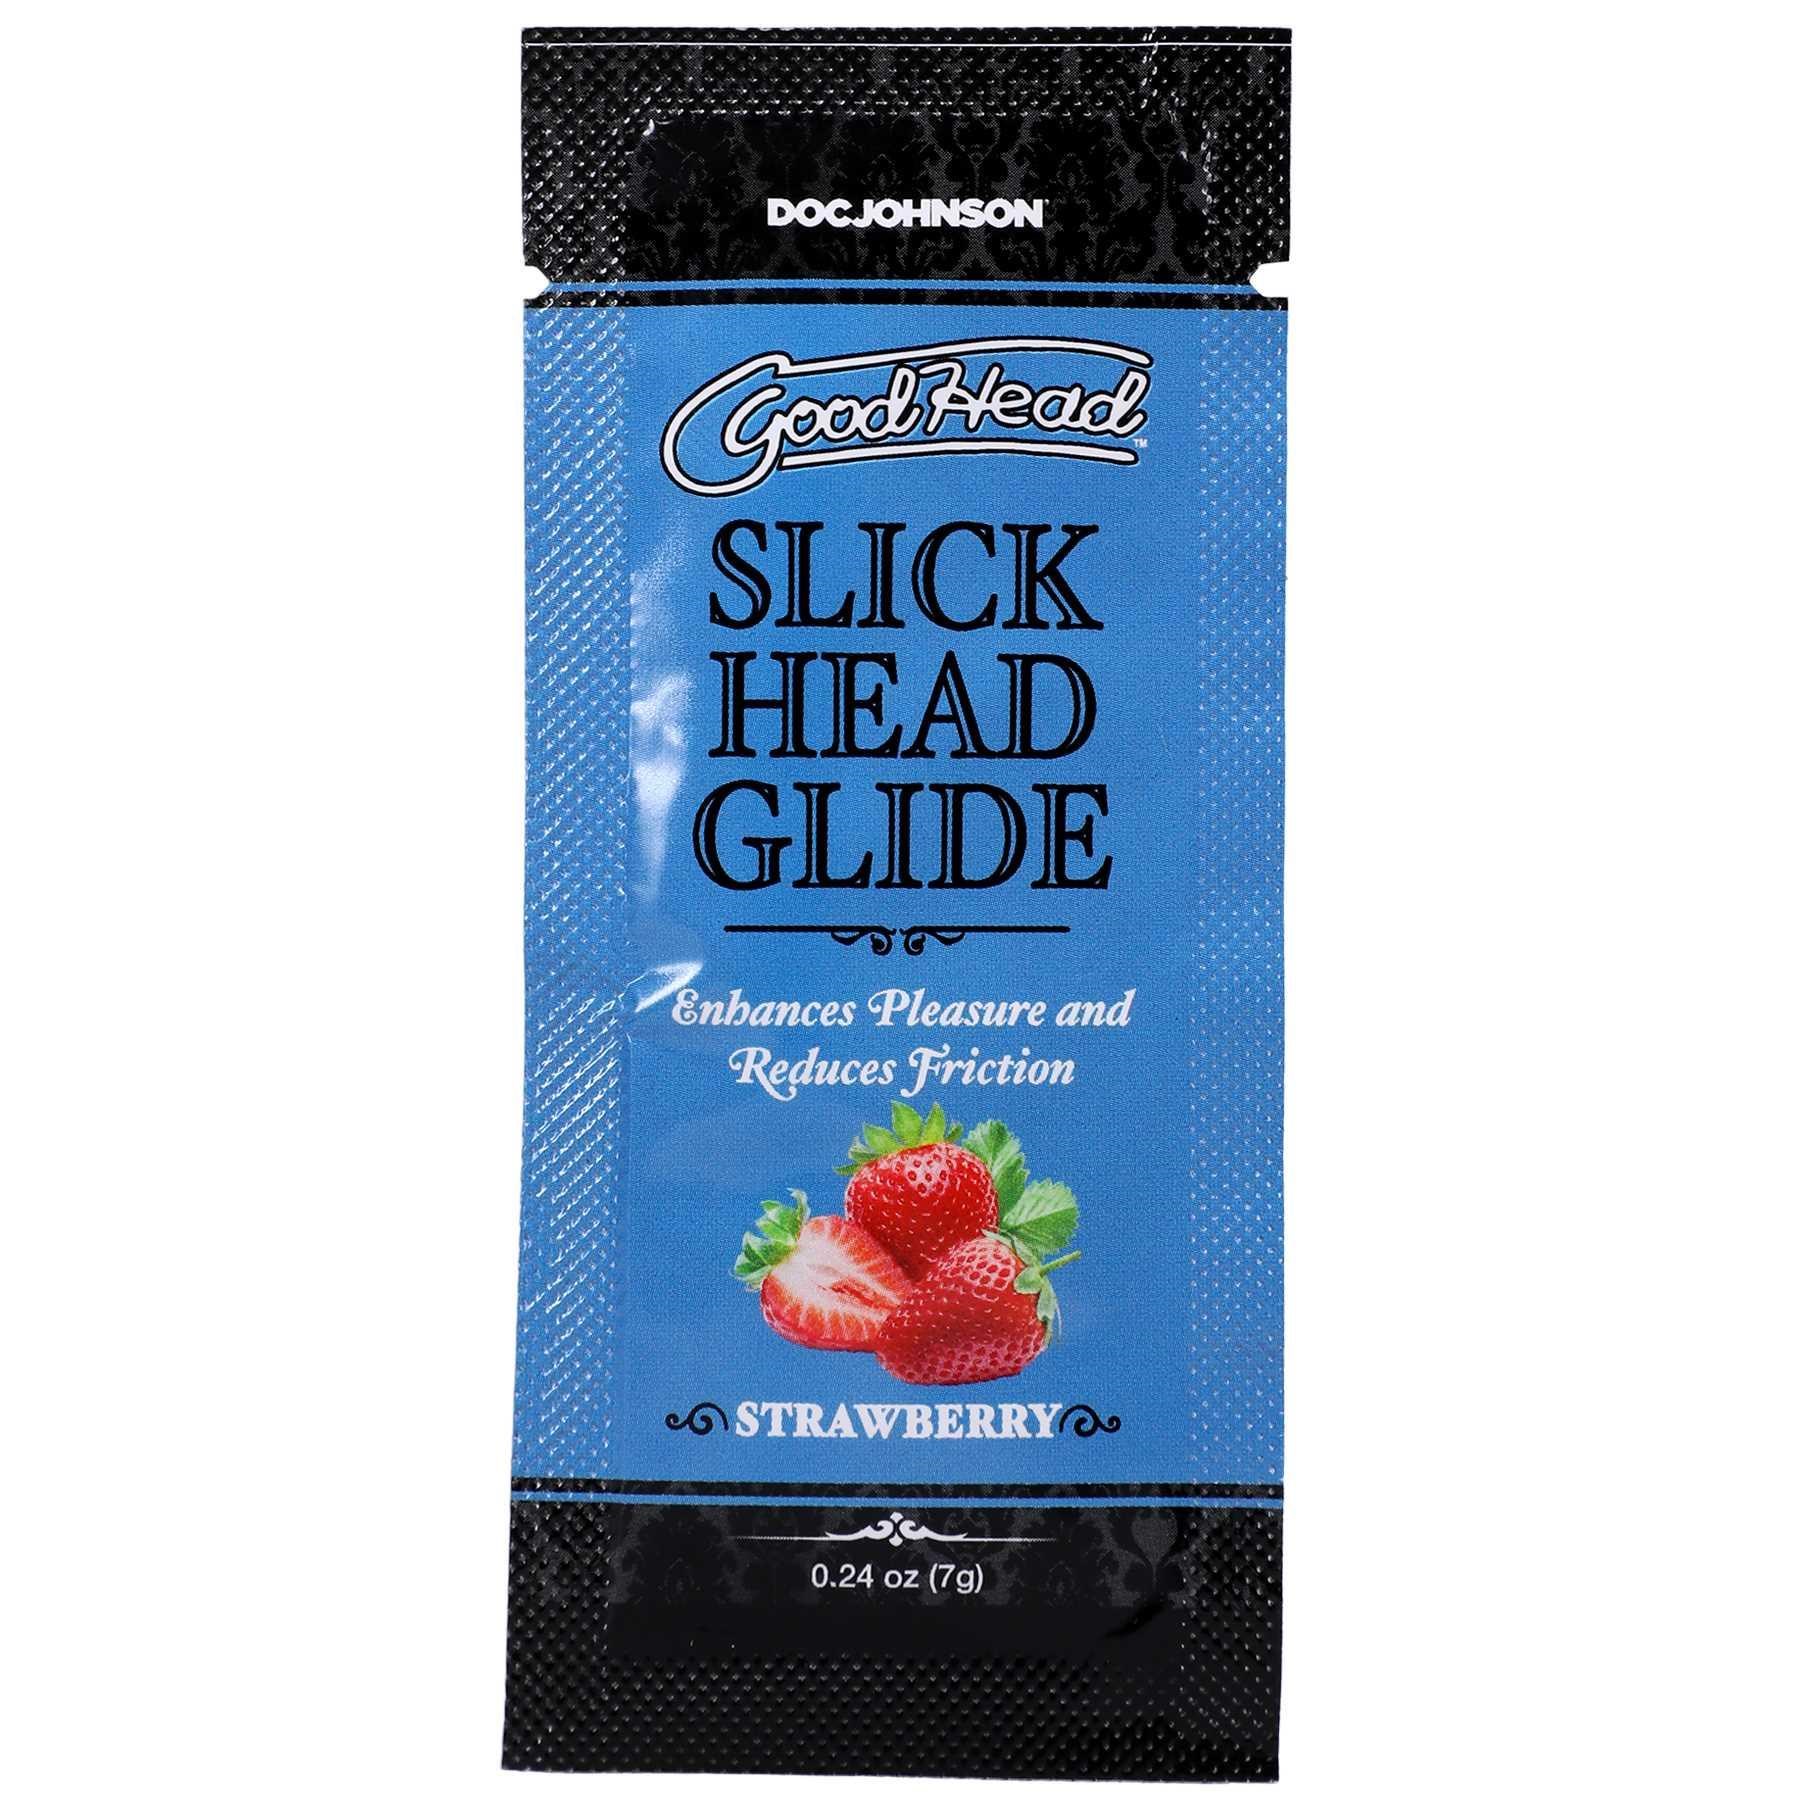 GoodHead - Slick Head Glide -strawberry front of package-  0.24 oz.